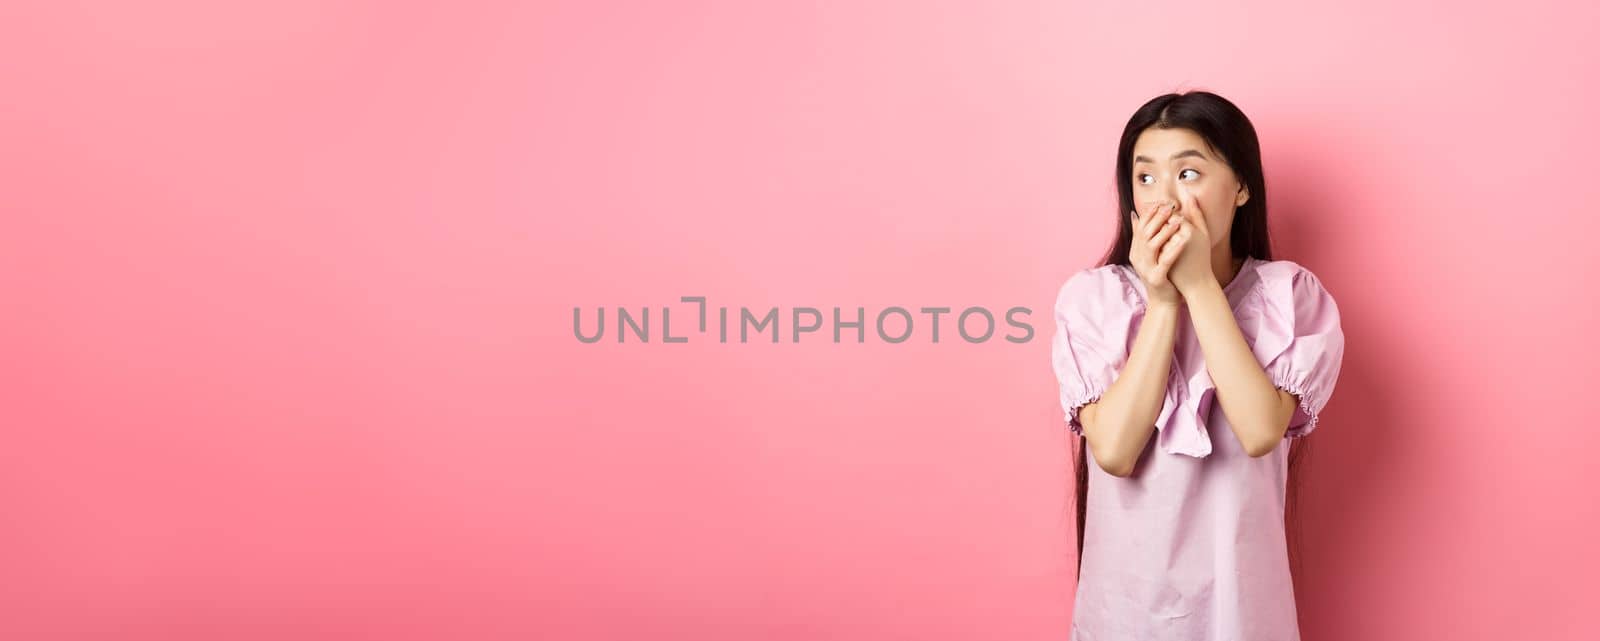 Shocked and startled asian woman looking aside at logo, covering mouth with hands speechless, standing in dress on pink background by Benzoix